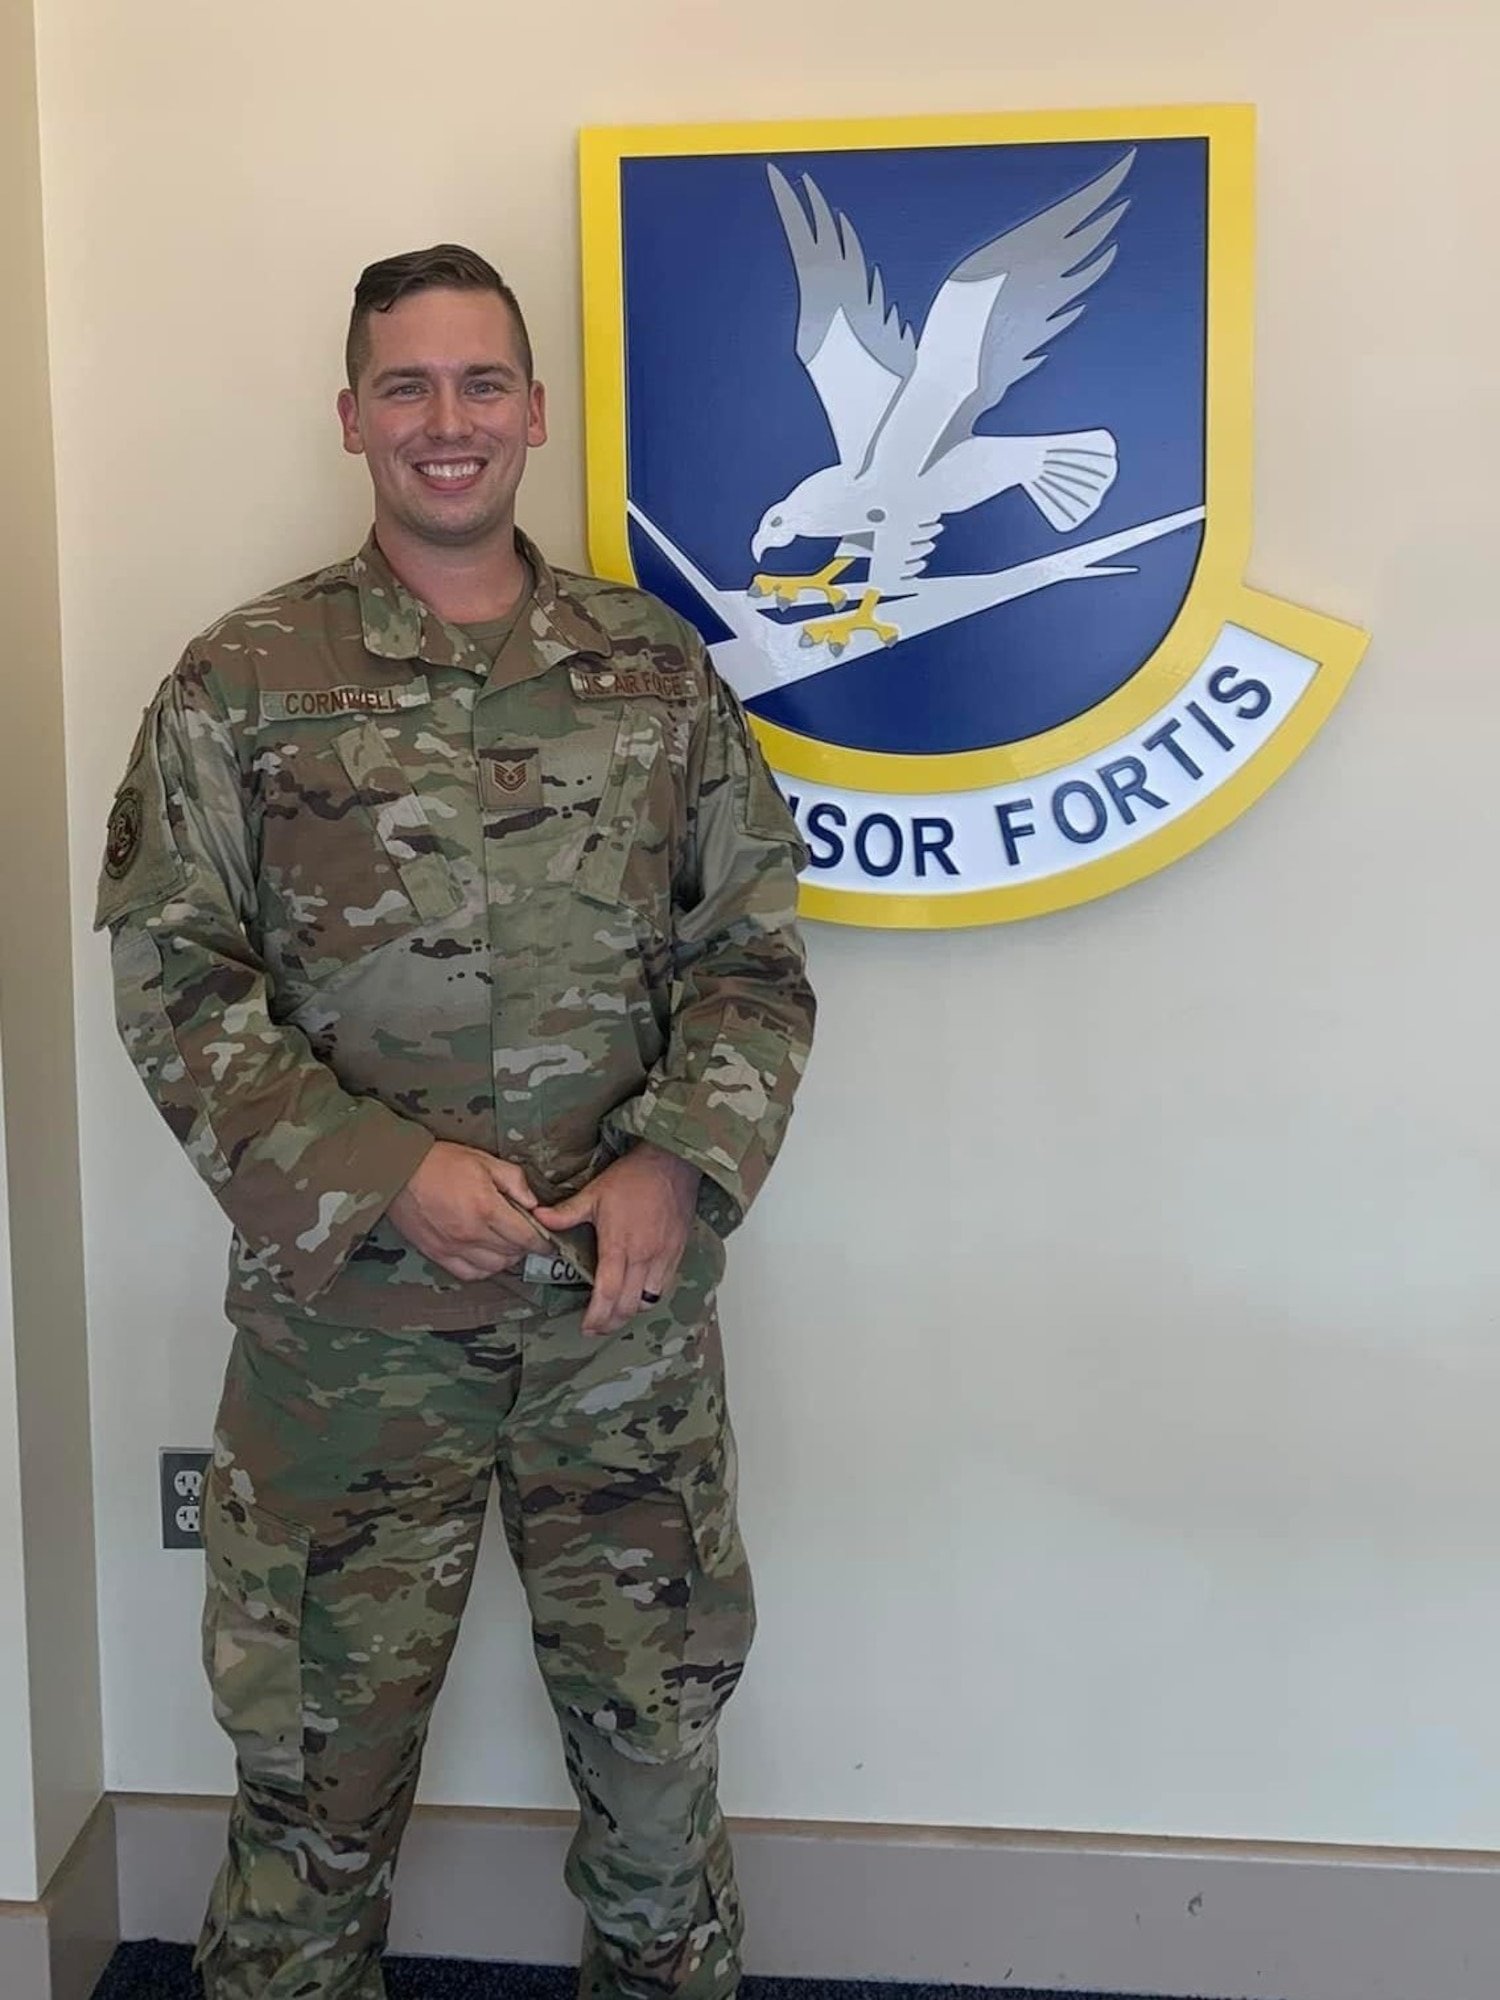 Tech. Sgt. Jonah Cornwell, 66th Security Forces Squadron defender, poses in front of a Defensor Fortis emblem affixed to a wall at Hanscom Air Force Base, Mass. Last month, Cornwell was notified by his leadership team that he had been accepted into the Officer Training School at Maxwell AFB, Ala. (U.S. Air Force courtesy photo)